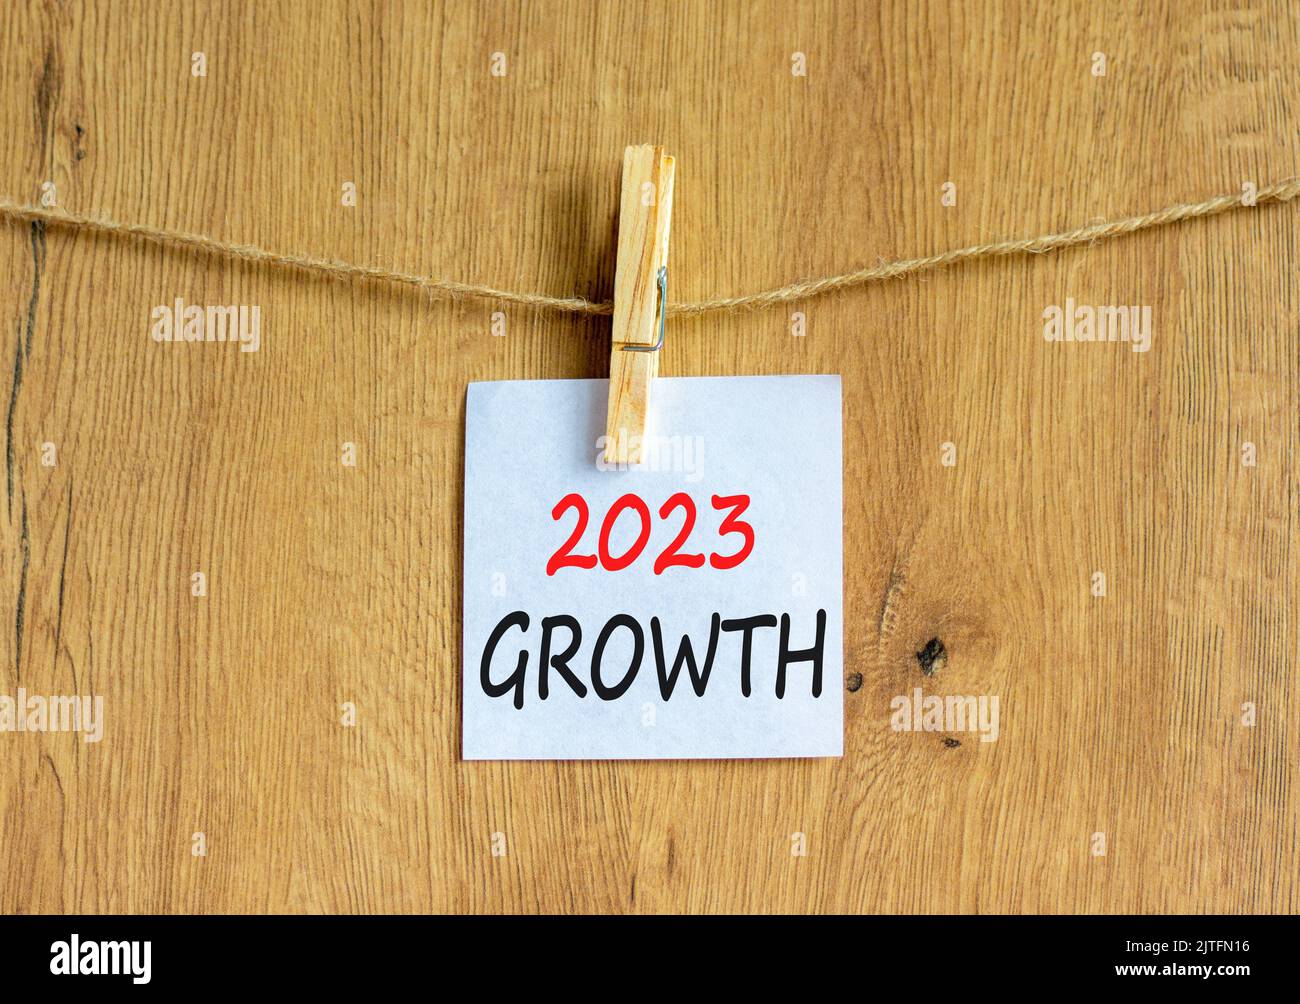 2023 Growth symbol. White paper with words 2023 Growth, clip on wooden clothespin. Beautiful wooden background. Business and 2023 growth concept. Copy Stock Photo